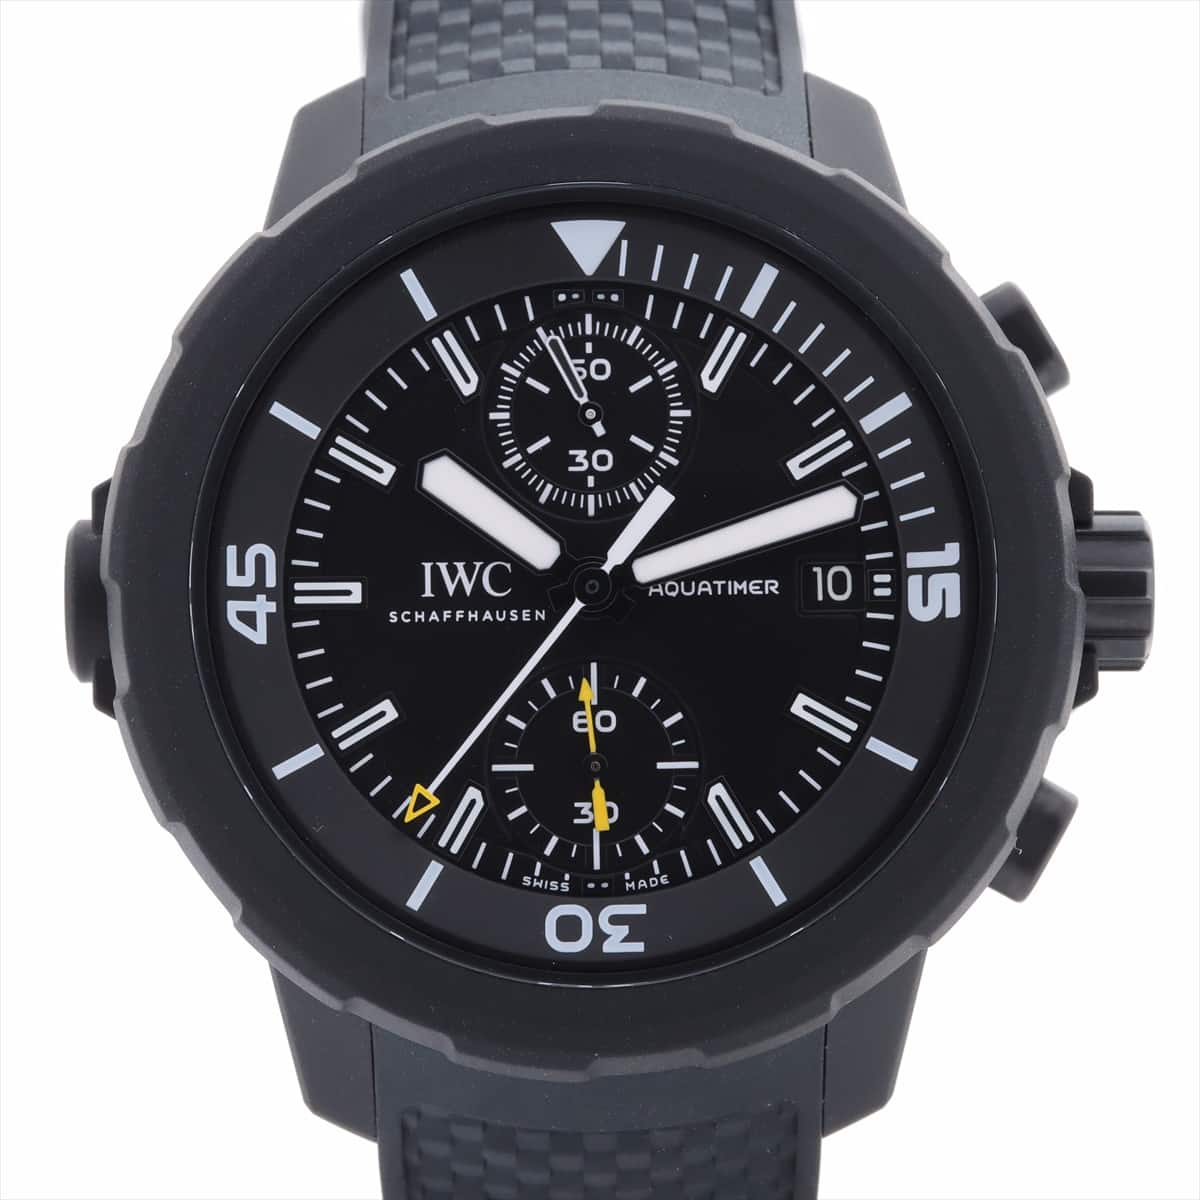 IWC Aquatimer IW379502 SS & rubber AT Black-Face Watch strap with a scent of perfume Inner box only